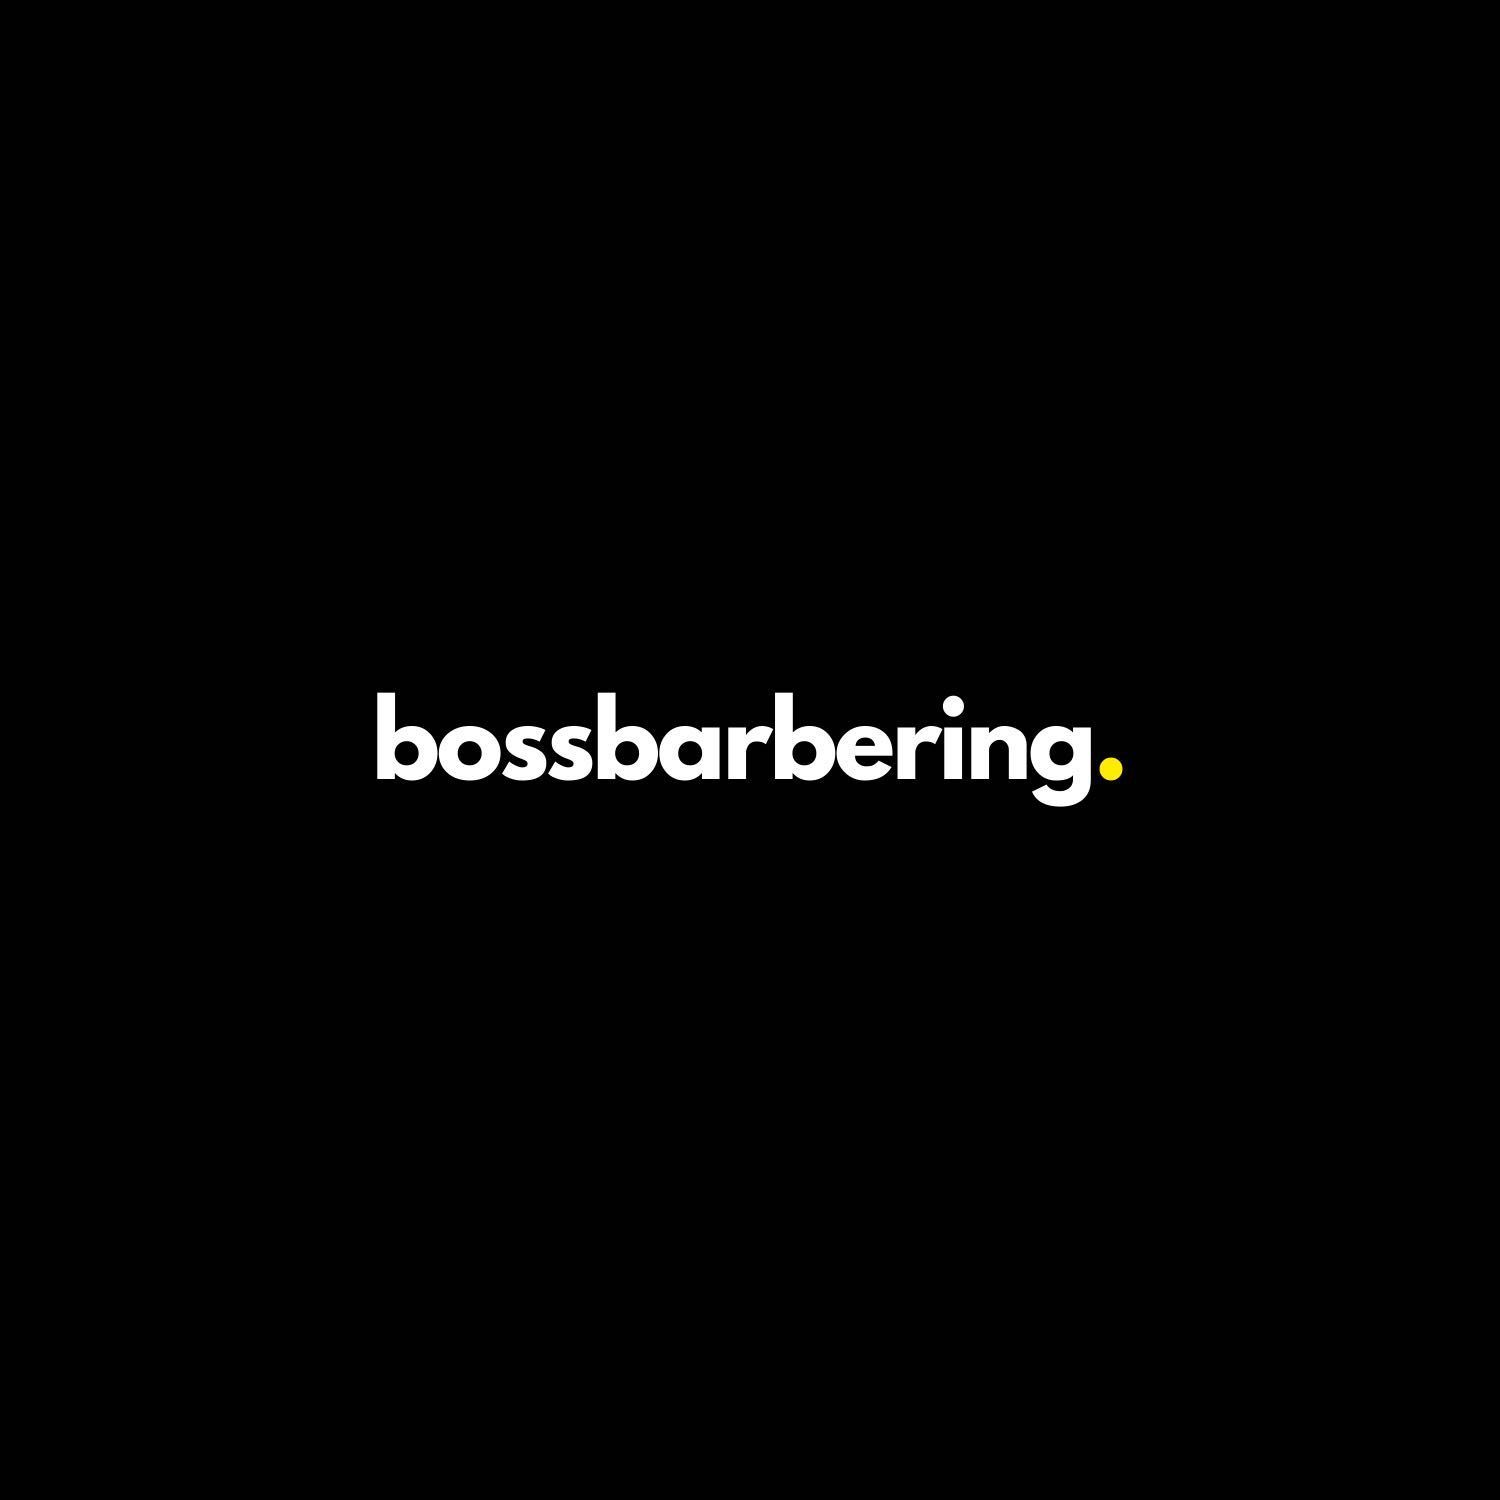 Boss barbering (Iford), 1152 Christchurch Road, Bournemouth